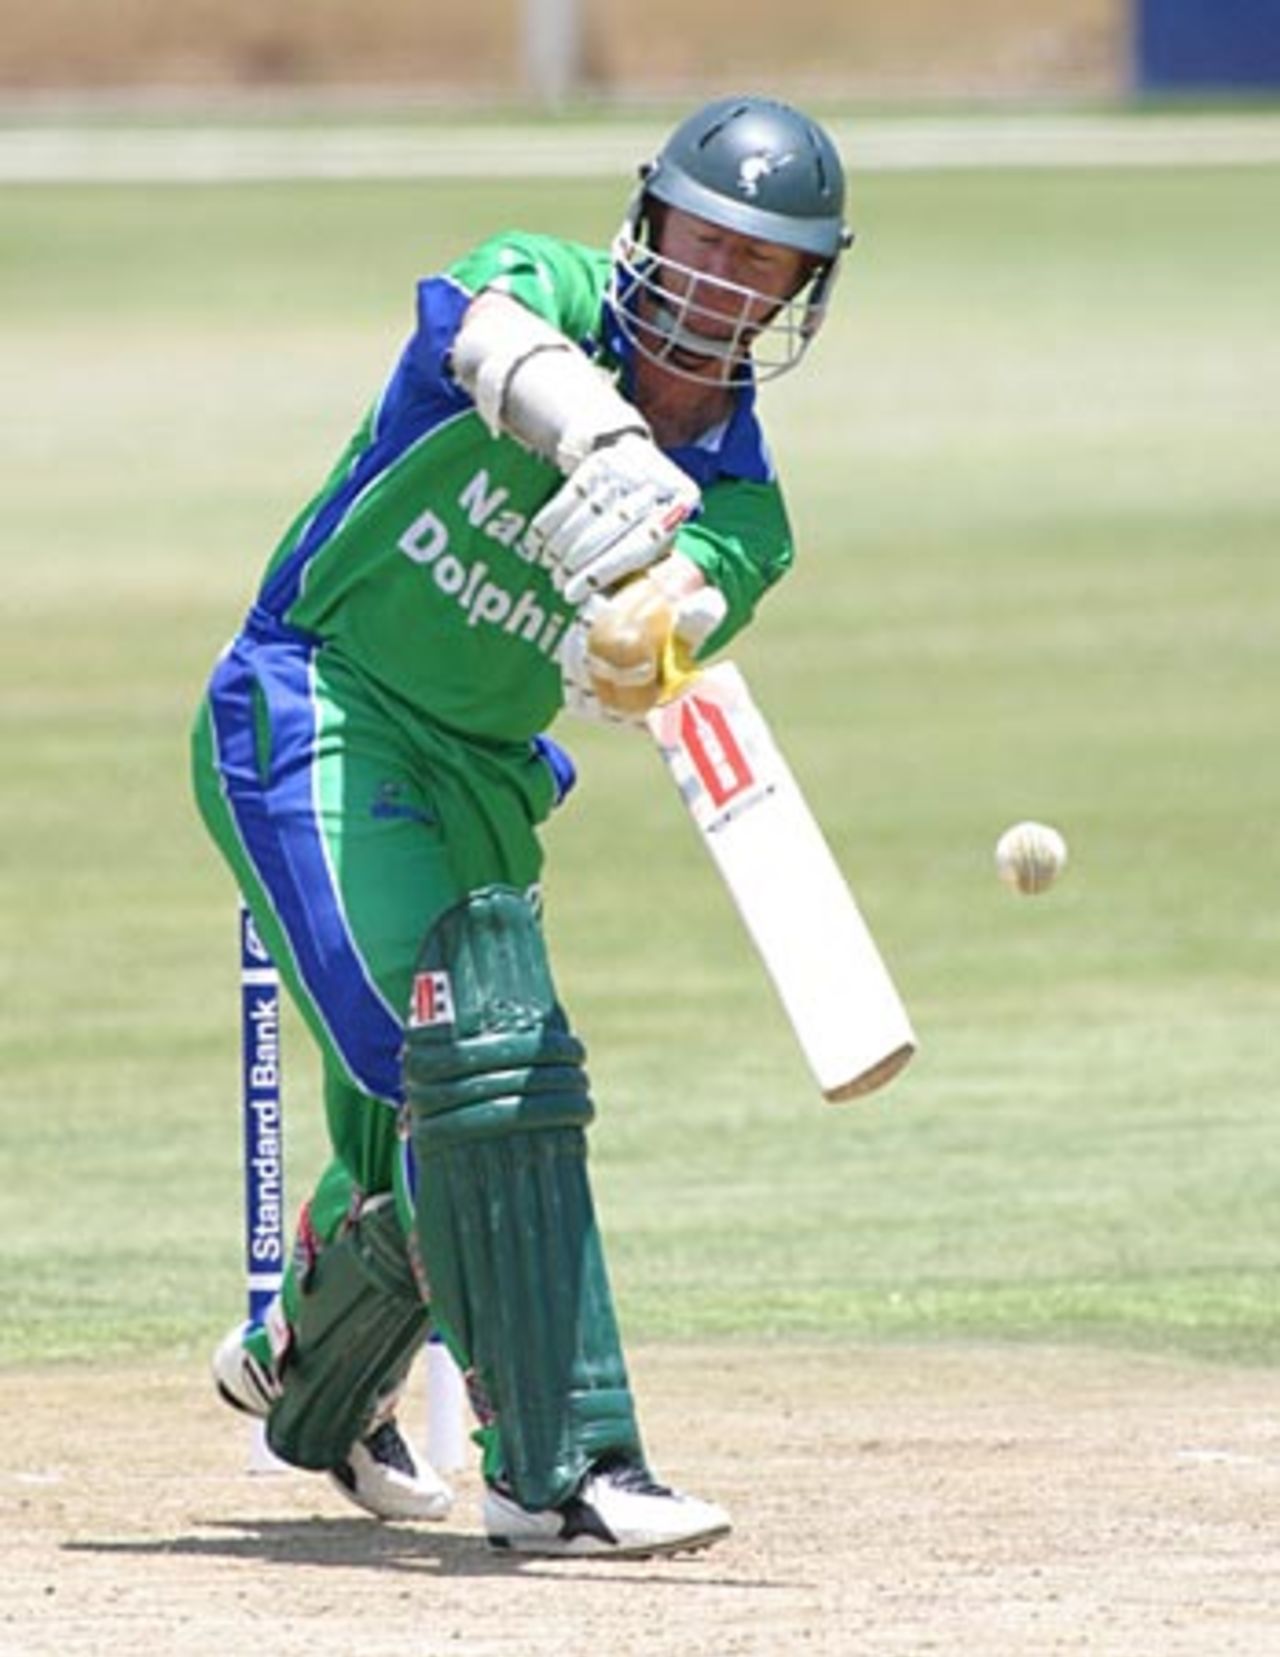 Lance Klusener on the way to a run-a-ball 30, Titans v Dolphins, Standard Bank Cup, Willowmoore Park, November 28, 2004